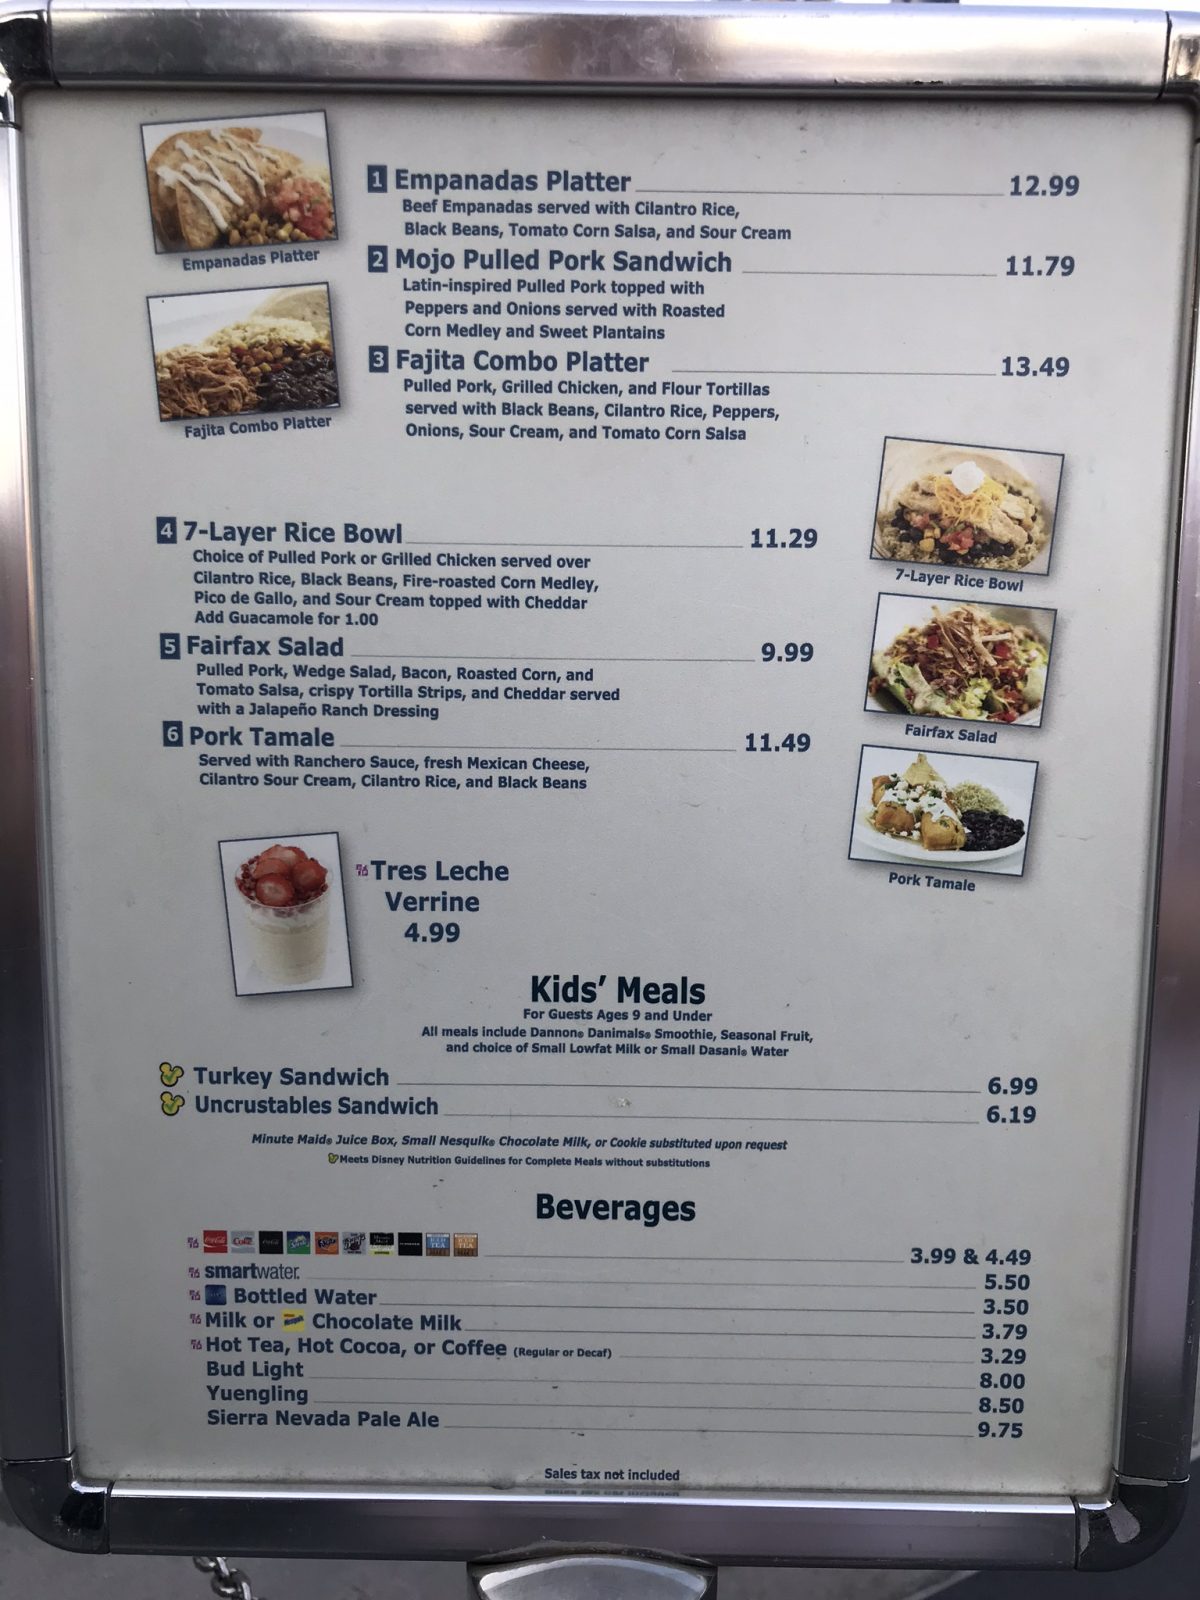 fairefax fare menu with photos and pricing